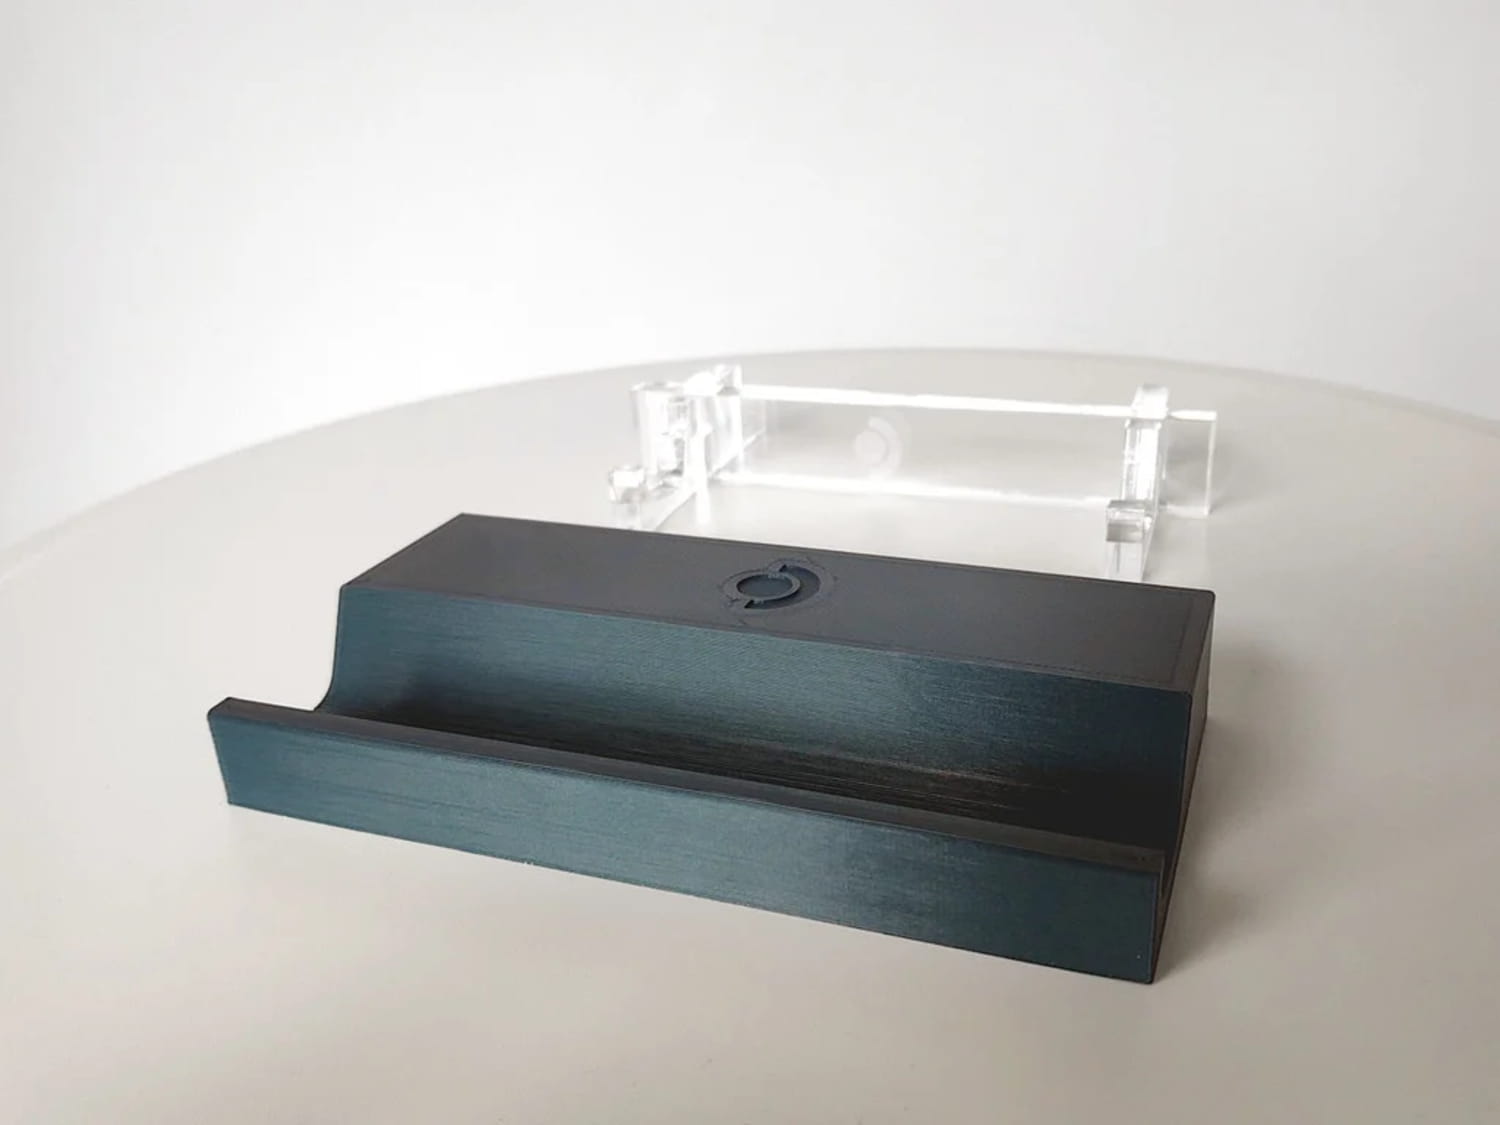 Laser Cut Acrylic Steam Deck Stand 6mm SVG File